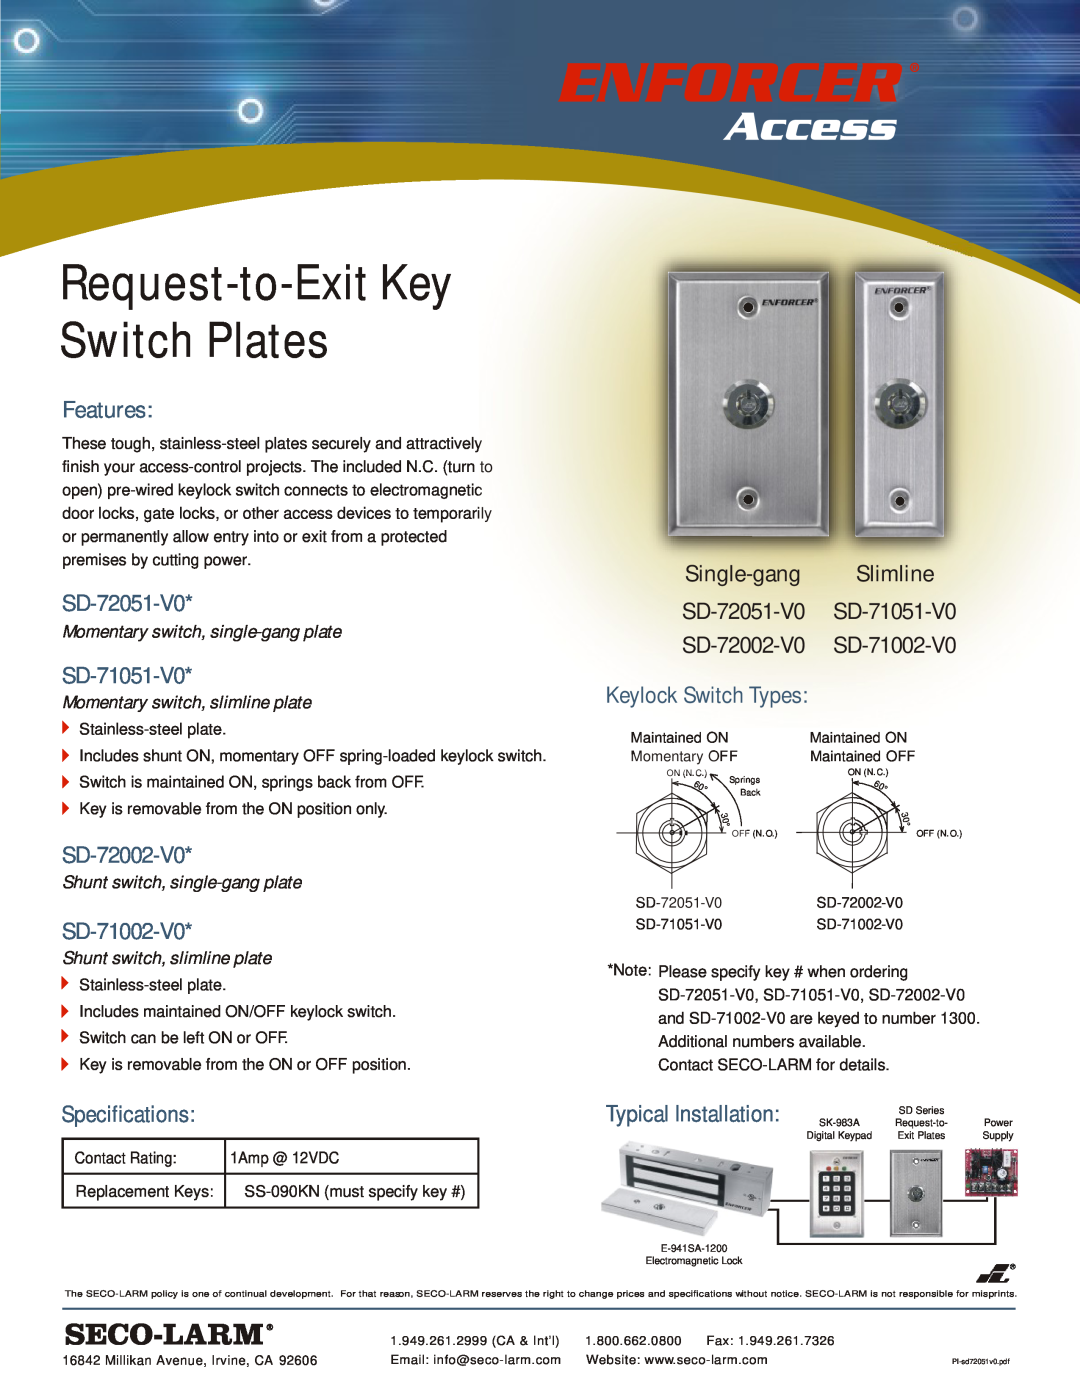 SECO-LARM USA SD-71051-V0 specifications Request-to-ExitKey, Switch Plates, Features, SD-72051-V0, SD-72002-V0 